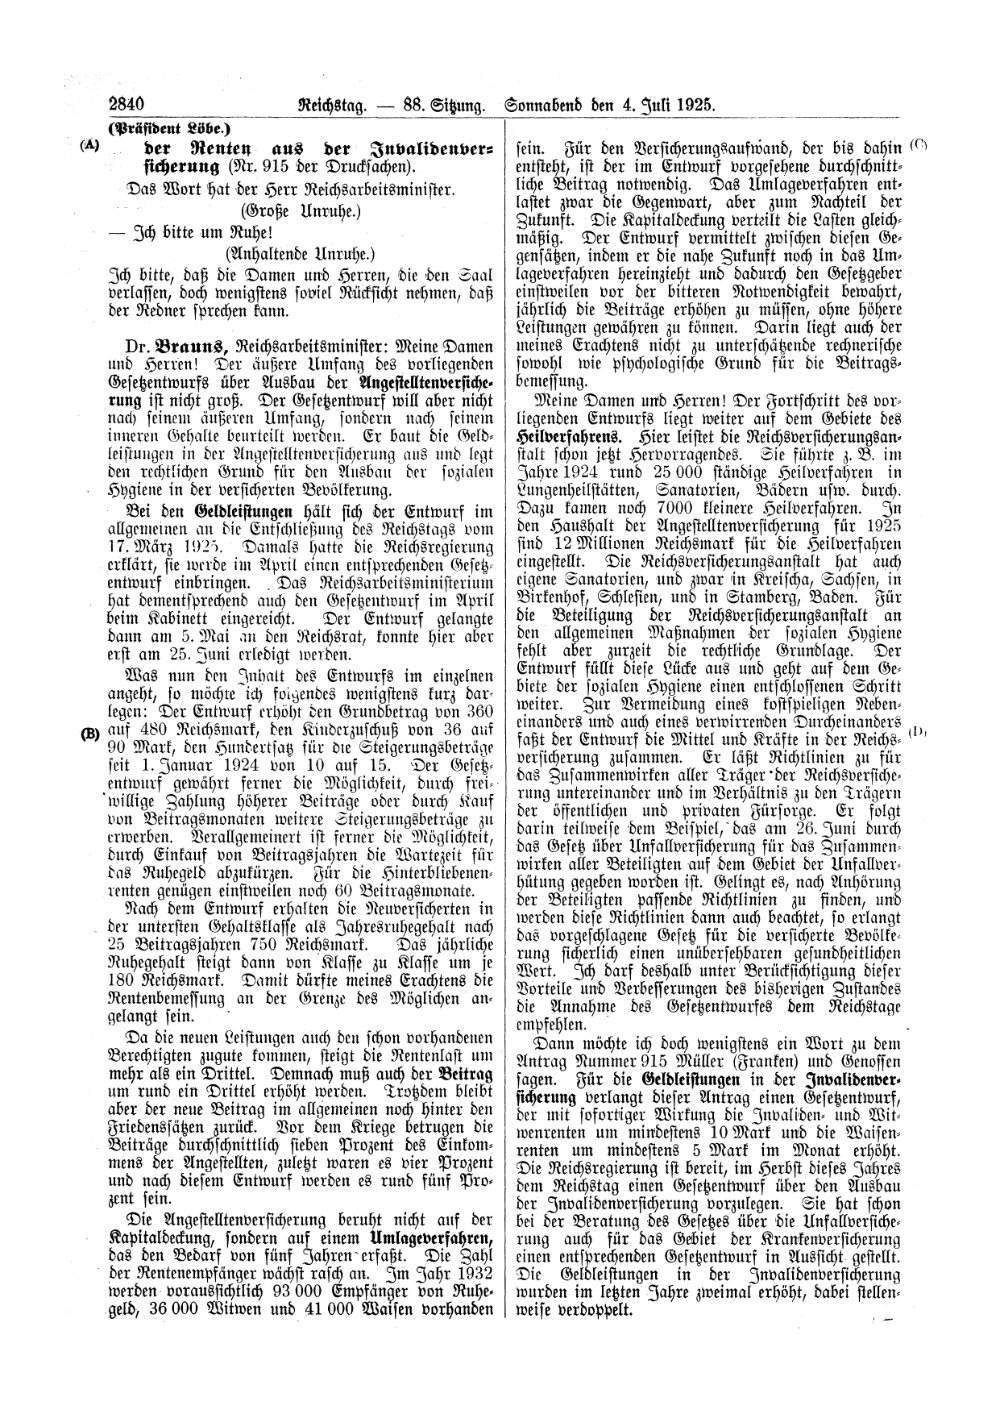 Scan of page 2840